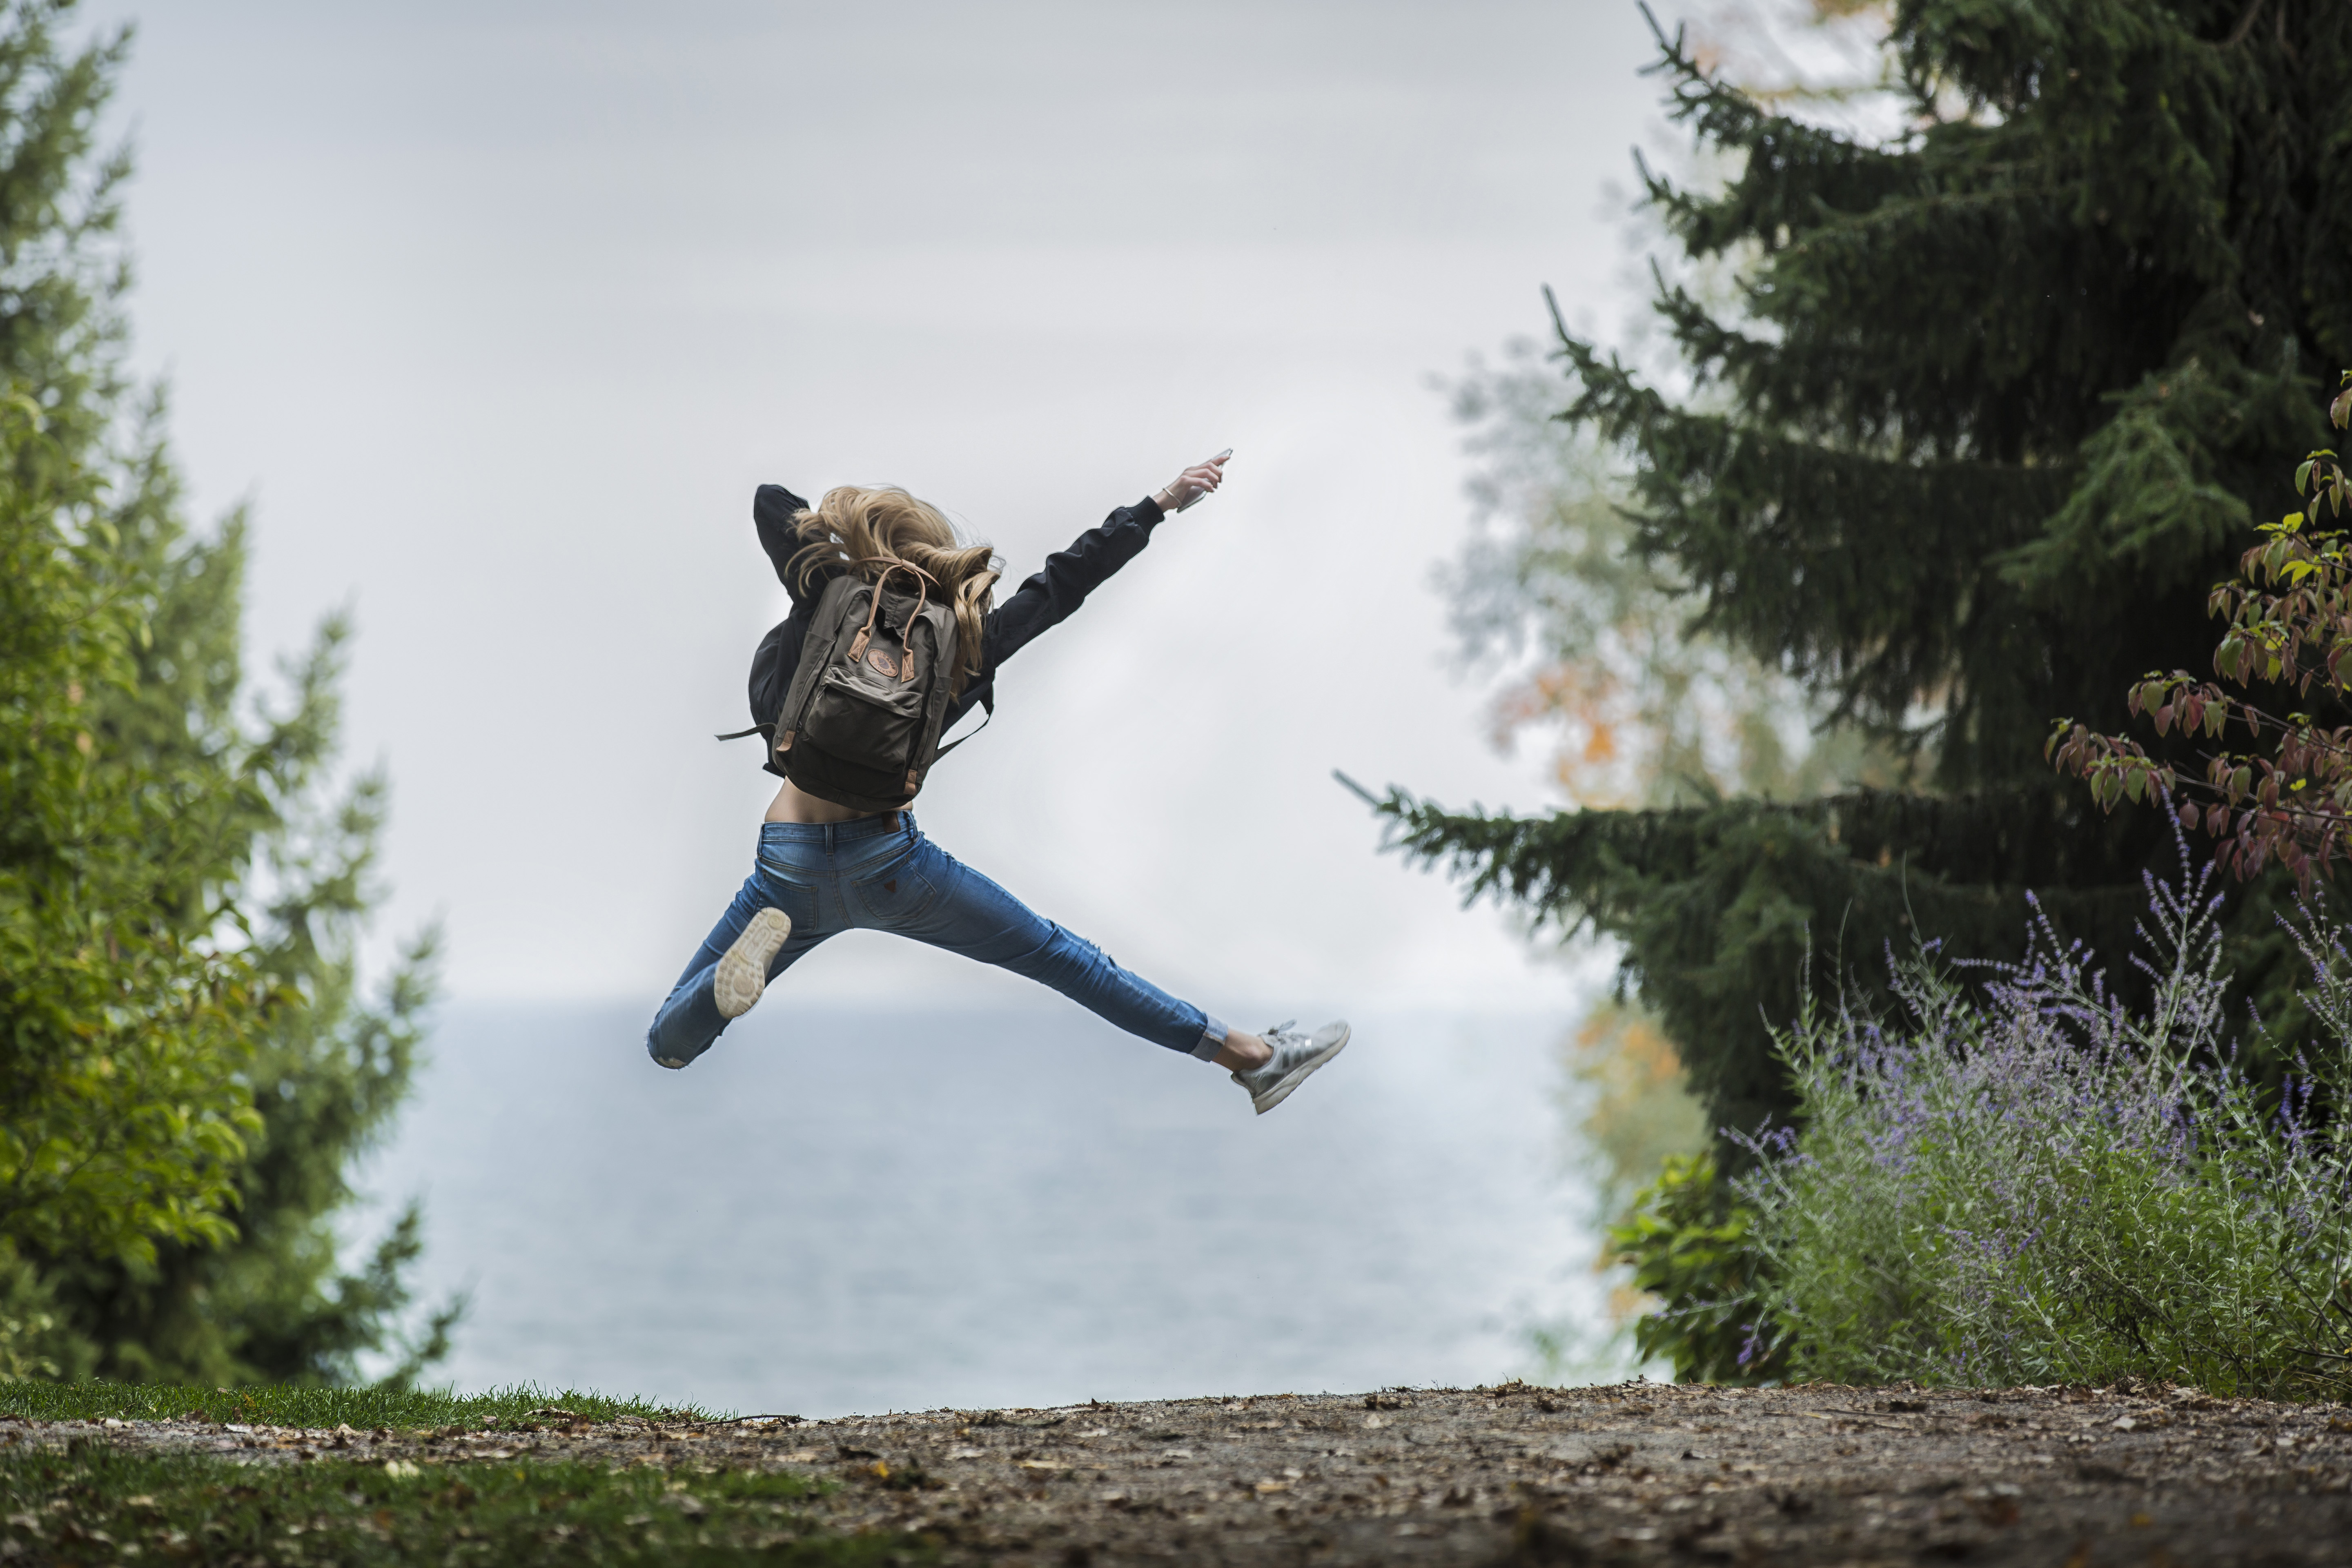 4 Steps for Creating More Joy in Your Life